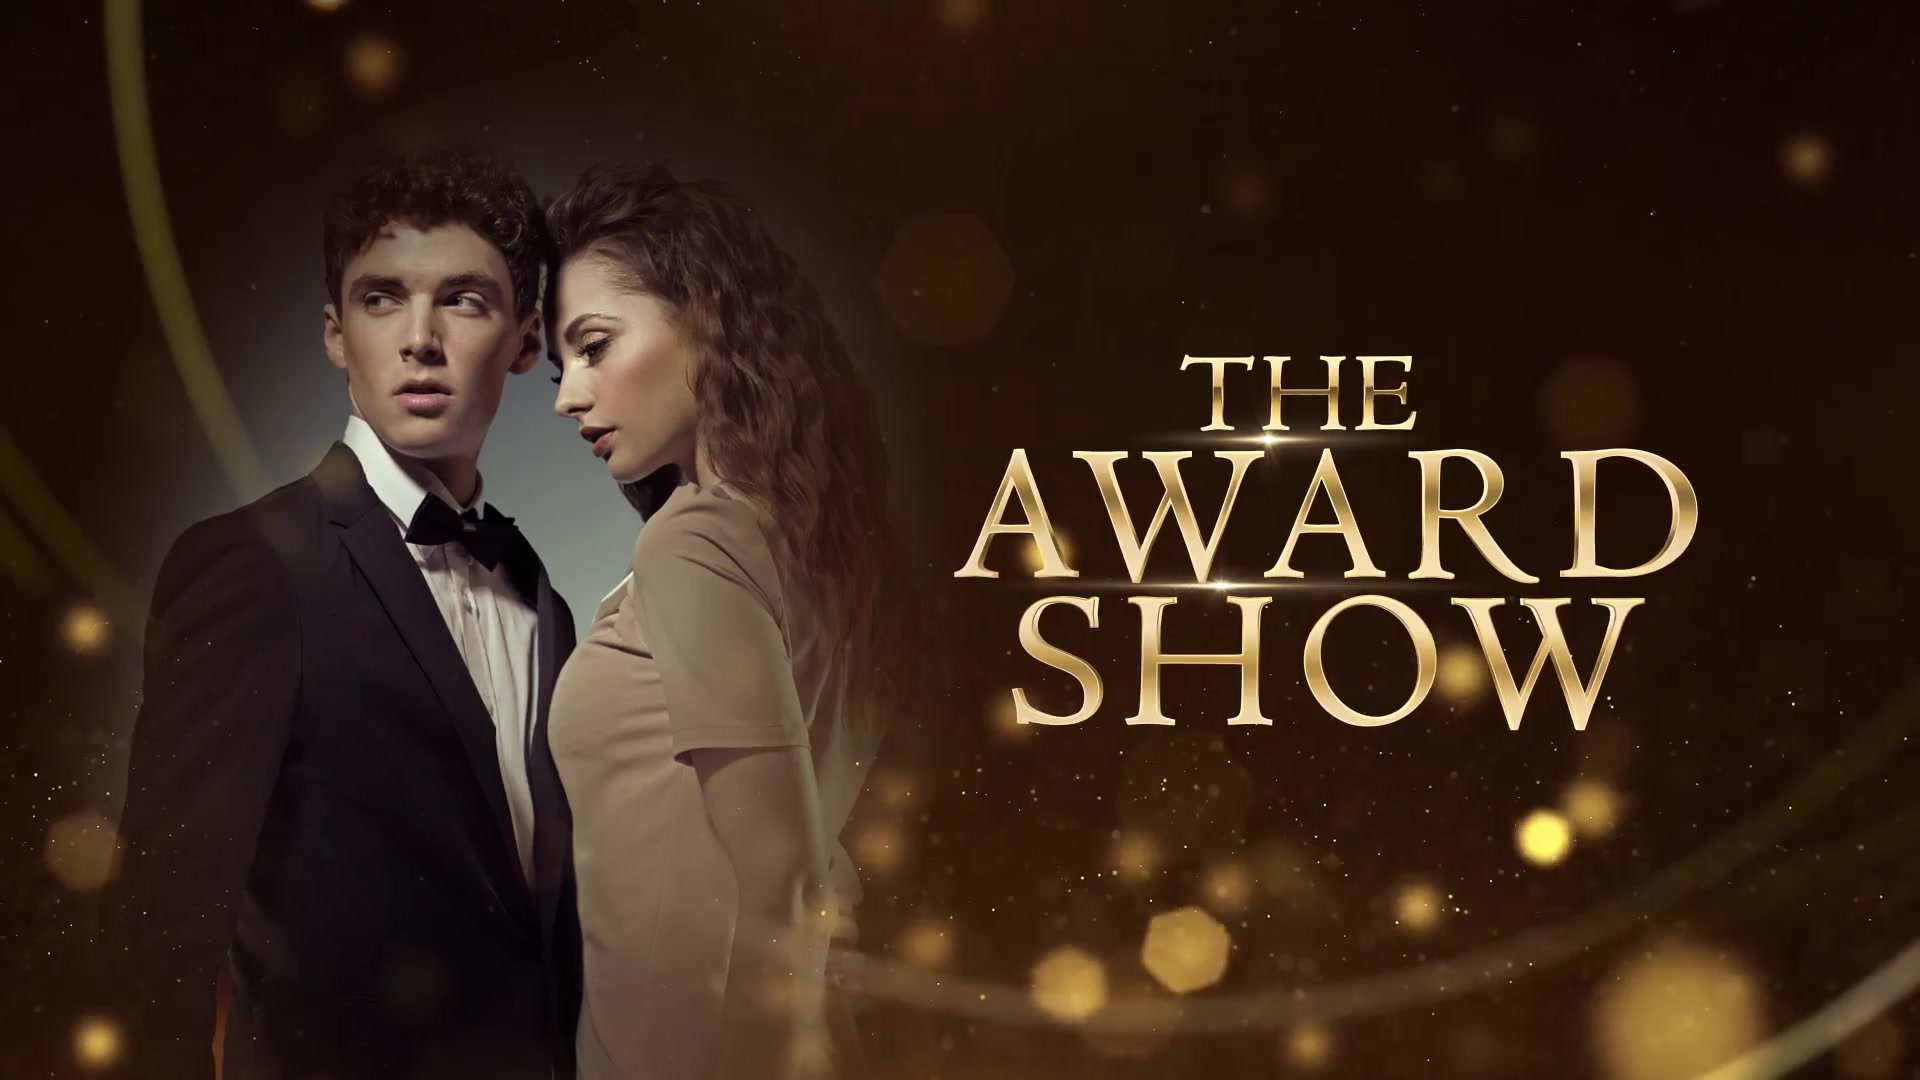 Awards Show - Download Videohive 18809015